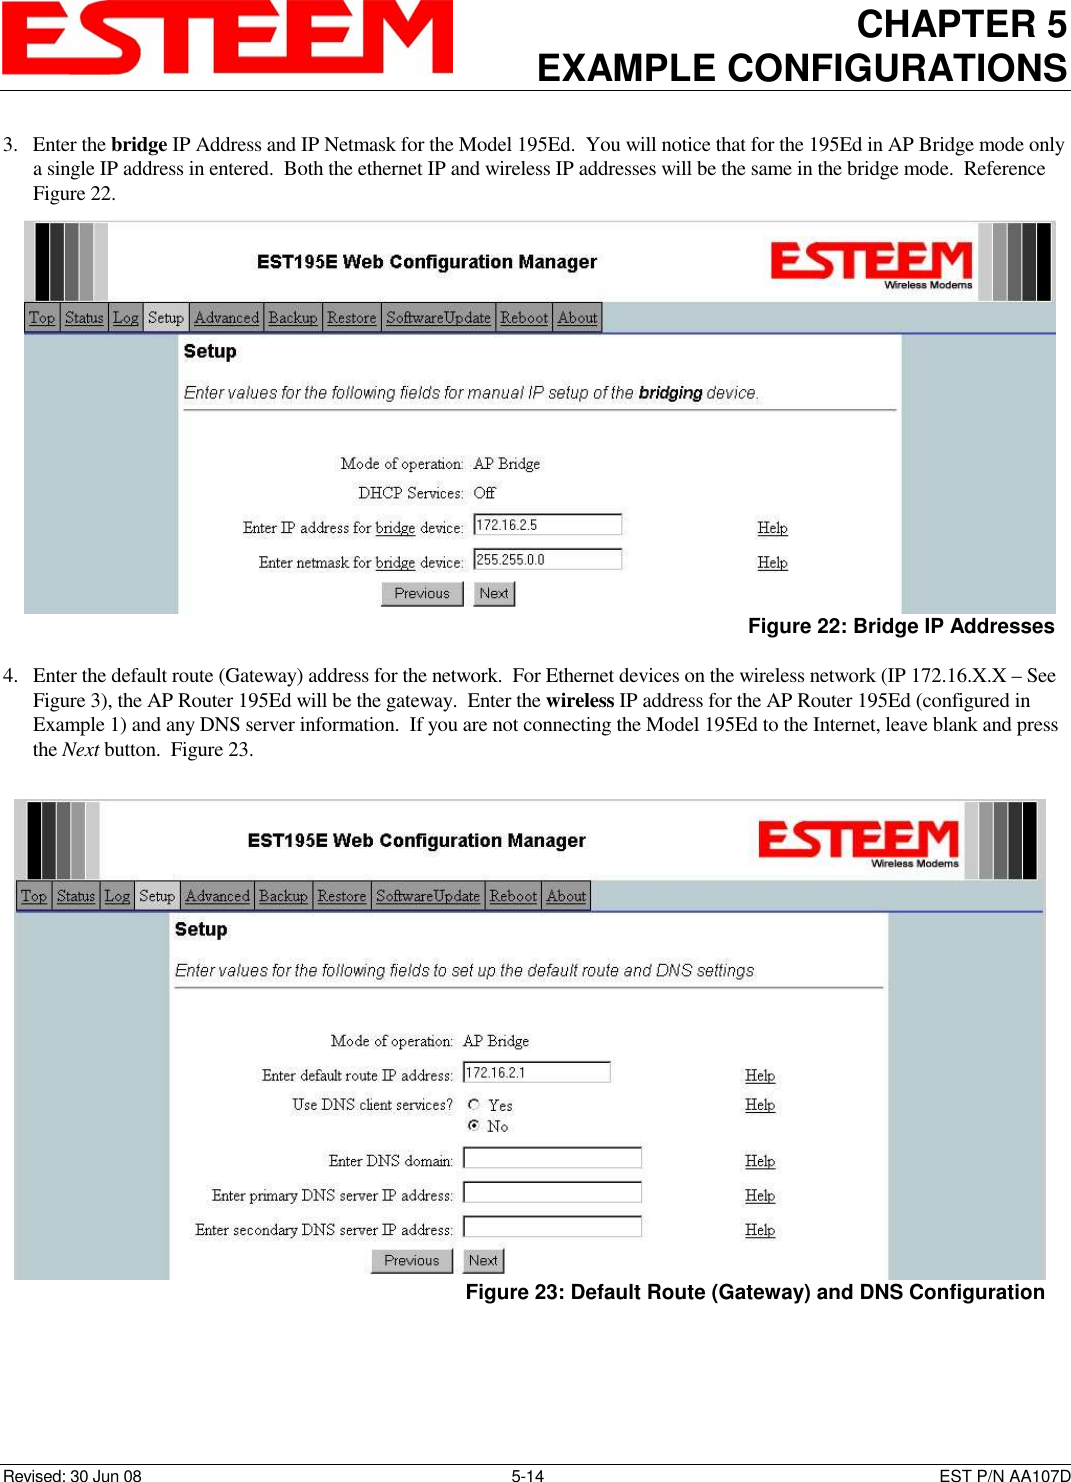 CHAPTER 5 EXAMPLE CONFIGURATIONS    Revised: 30 Jun 08  5-14  EST P/N AA107D 3. Enter the bridge IP Address and IP Netmask for the Model 195Ed.  You will notice that for the 195Ed in AP Bridge mode only a single IP address in entered.  Both the ethernet IP and wireless IP addresses will be the same in the bridge mode.  Reference Figure 22.  4. Enter the default route (Gateway) address for the network.  For Ethernet devices on the wireless network (IP 172.16.X.X – See Figure 3), the AP Router 195Ed will be the gateway.  Enter the wireless IP address for the AP Router 195Ed (configured in Example 1) and any DNS server information.  If you are not connecting the Model 195Ed to the Internet, leave blank and press the Next button.  Figure 23.   Figure 22: Bridge IP Addresses  Figure 23: Default Route (Gateway) and DNS Configuration 